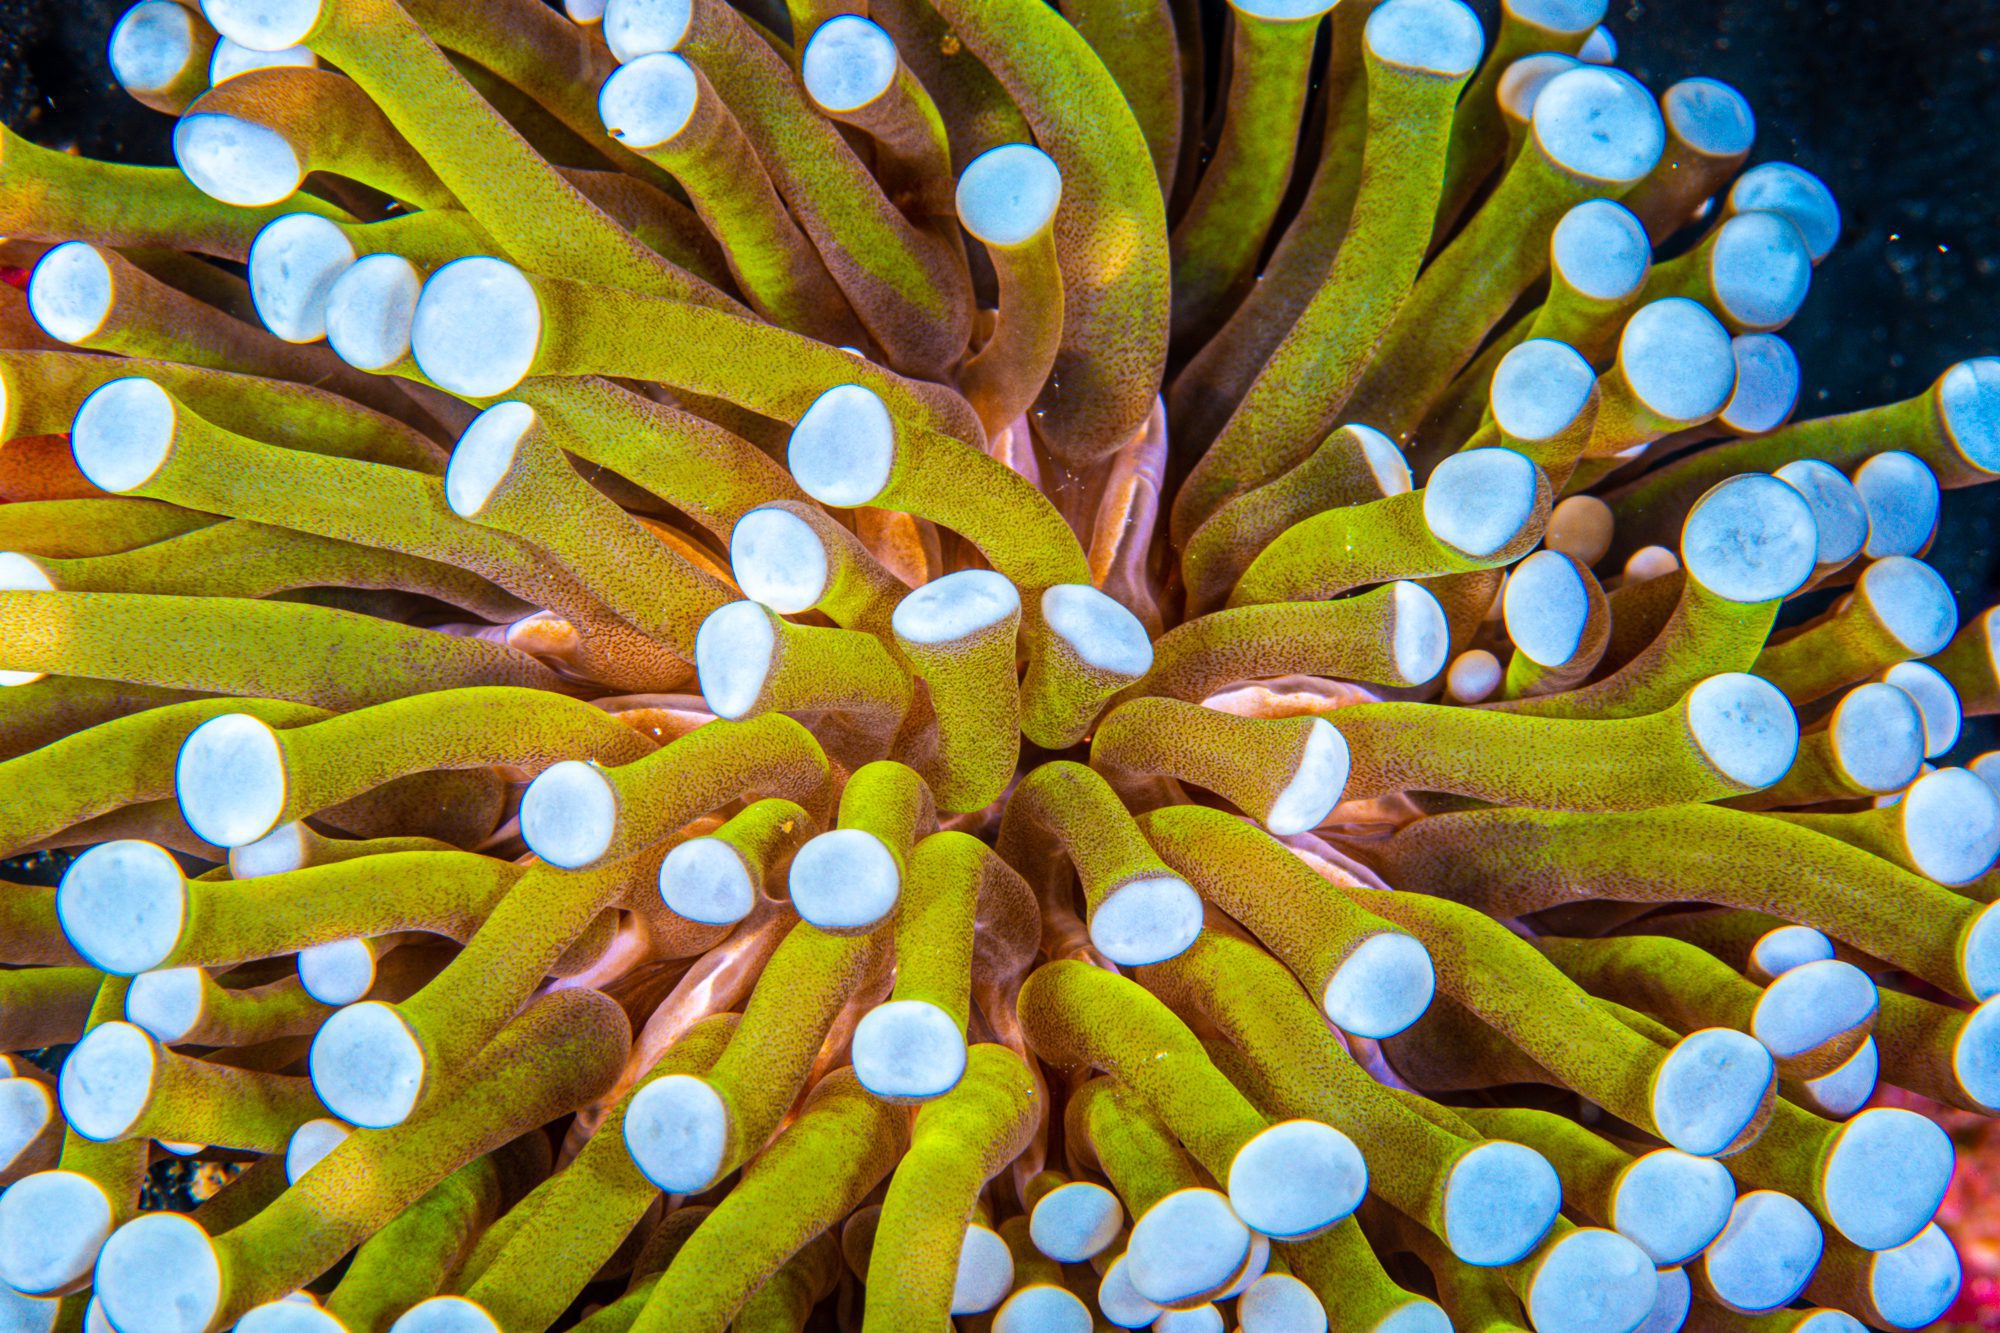 A close-up image of beige, white-tipped Euphyllia glabrescens